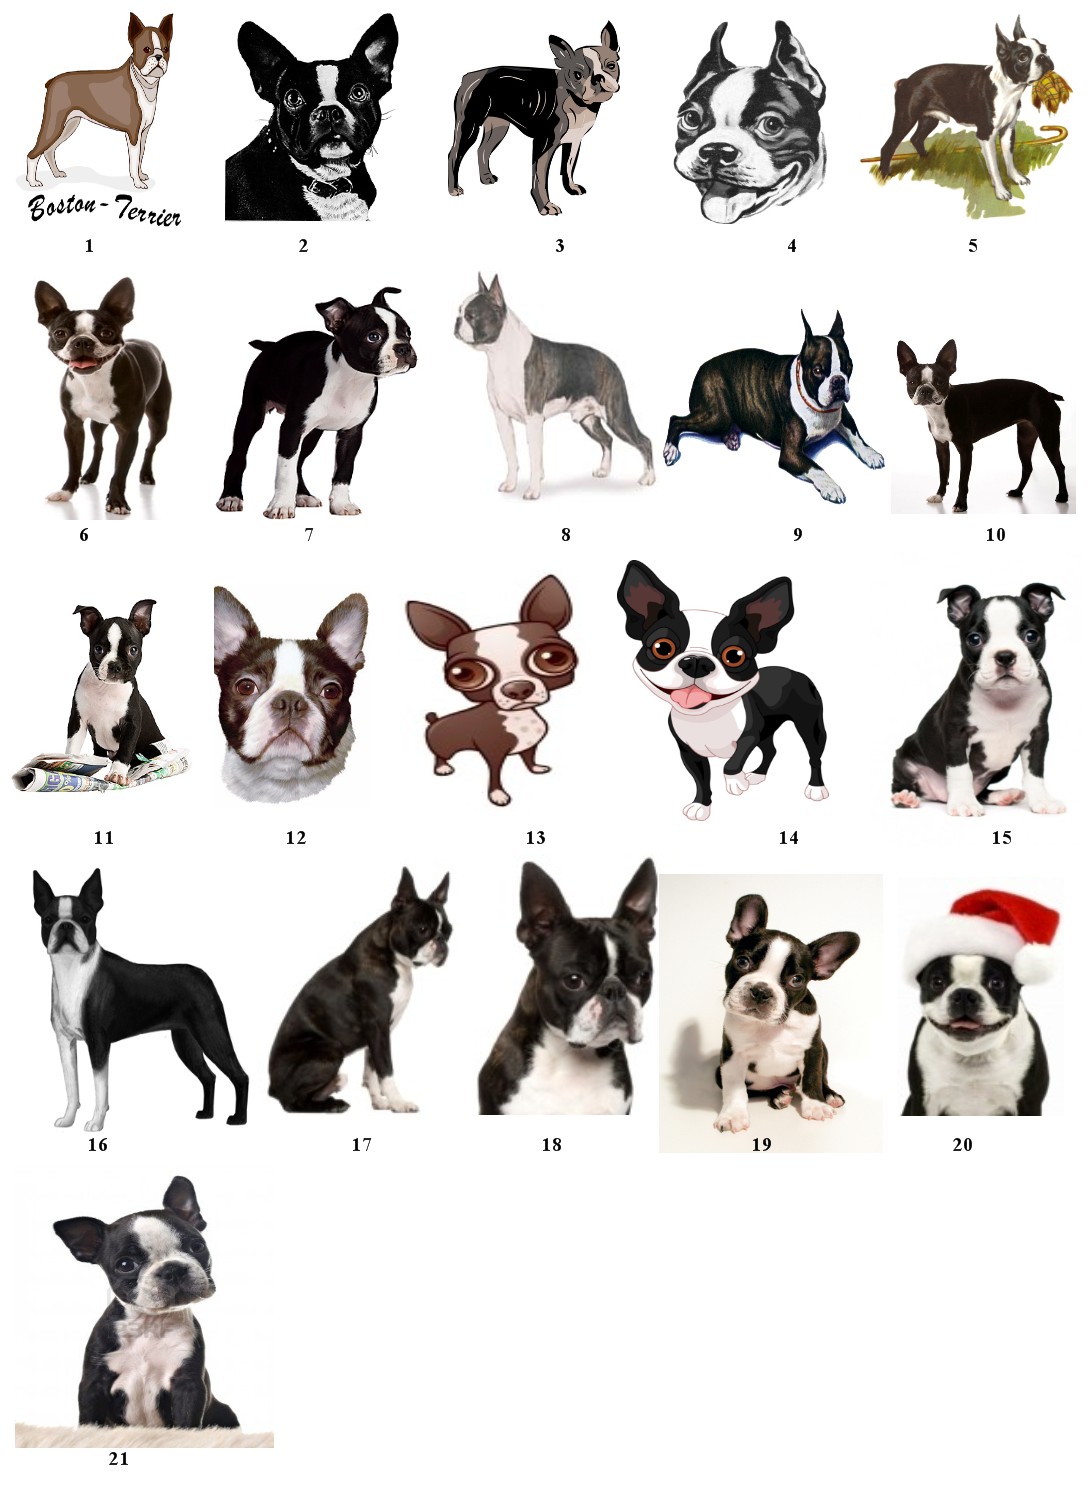 Boston Terrier Clipart: Add Some Adorable Style to Your Designs